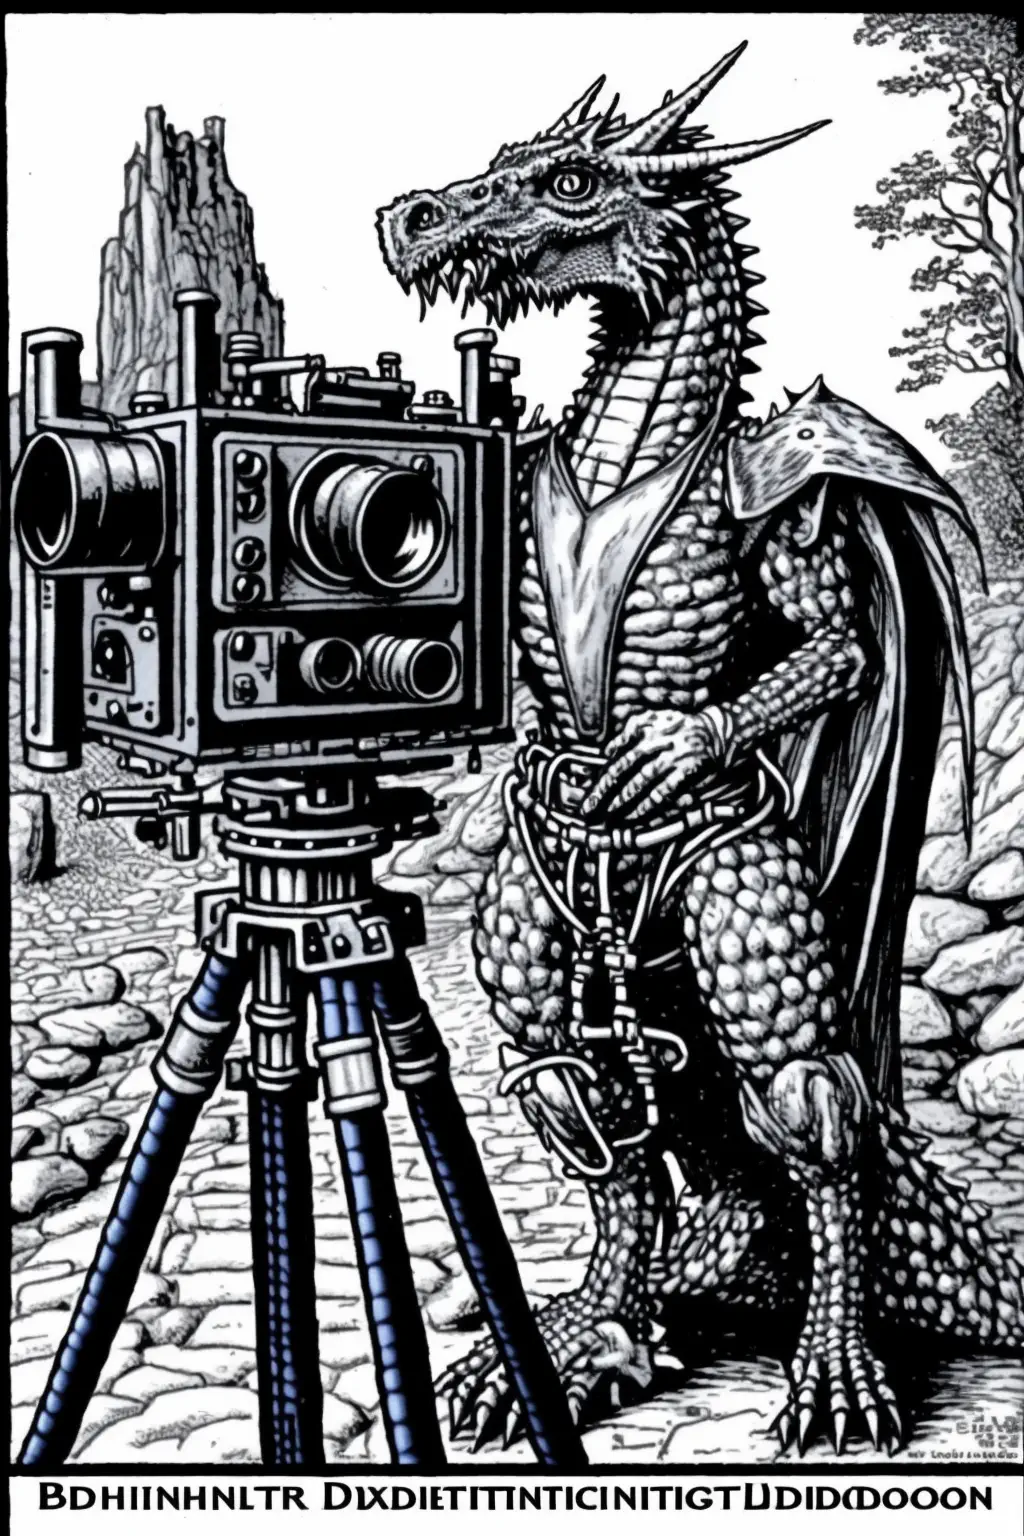 Drac00o_dragon_who_is_movie_camera_operator_he_stands_at_the_mo_70c6fbf0-5ef8-479d-bf89-e6f4ac9c5e58